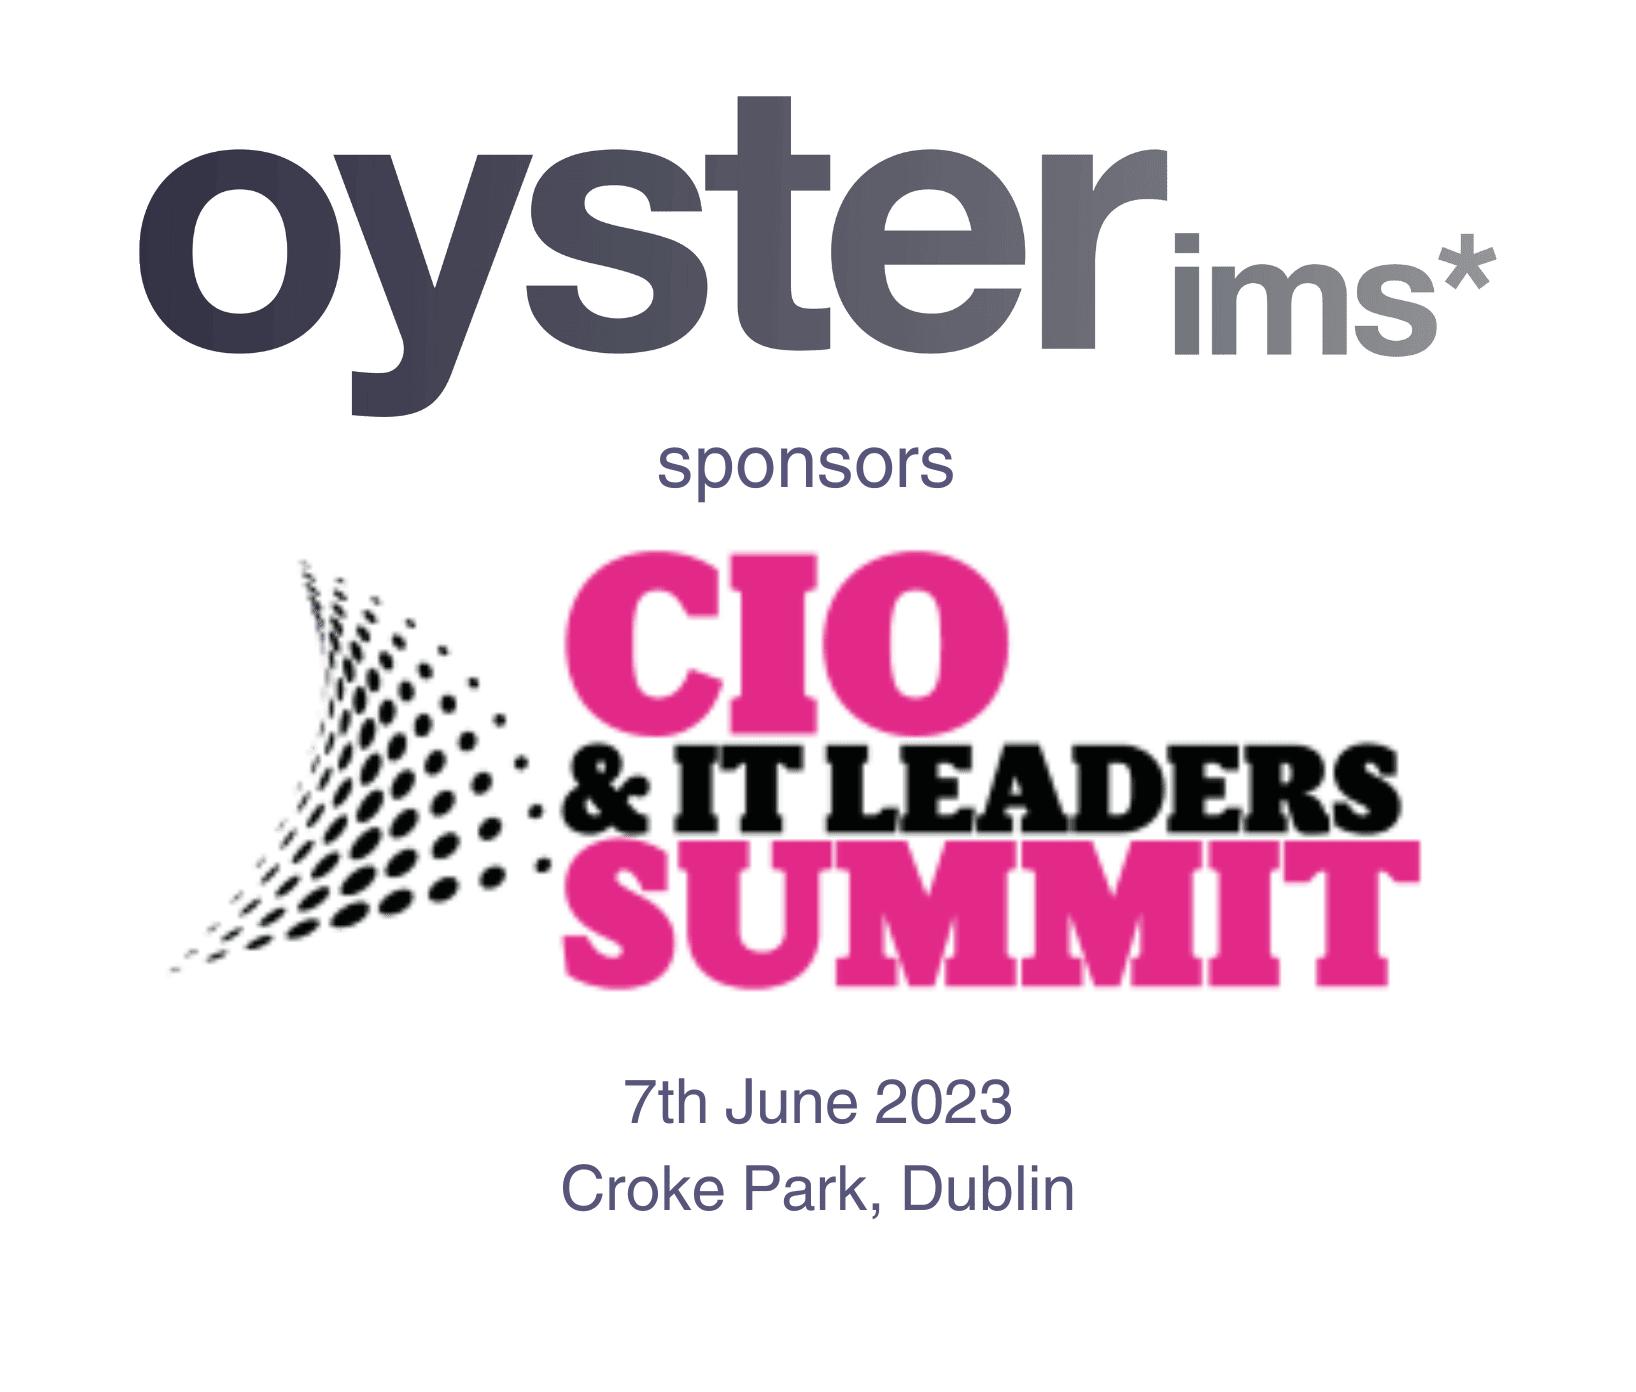 Oyster IMS sponsors CIO and IT Leaders Summit